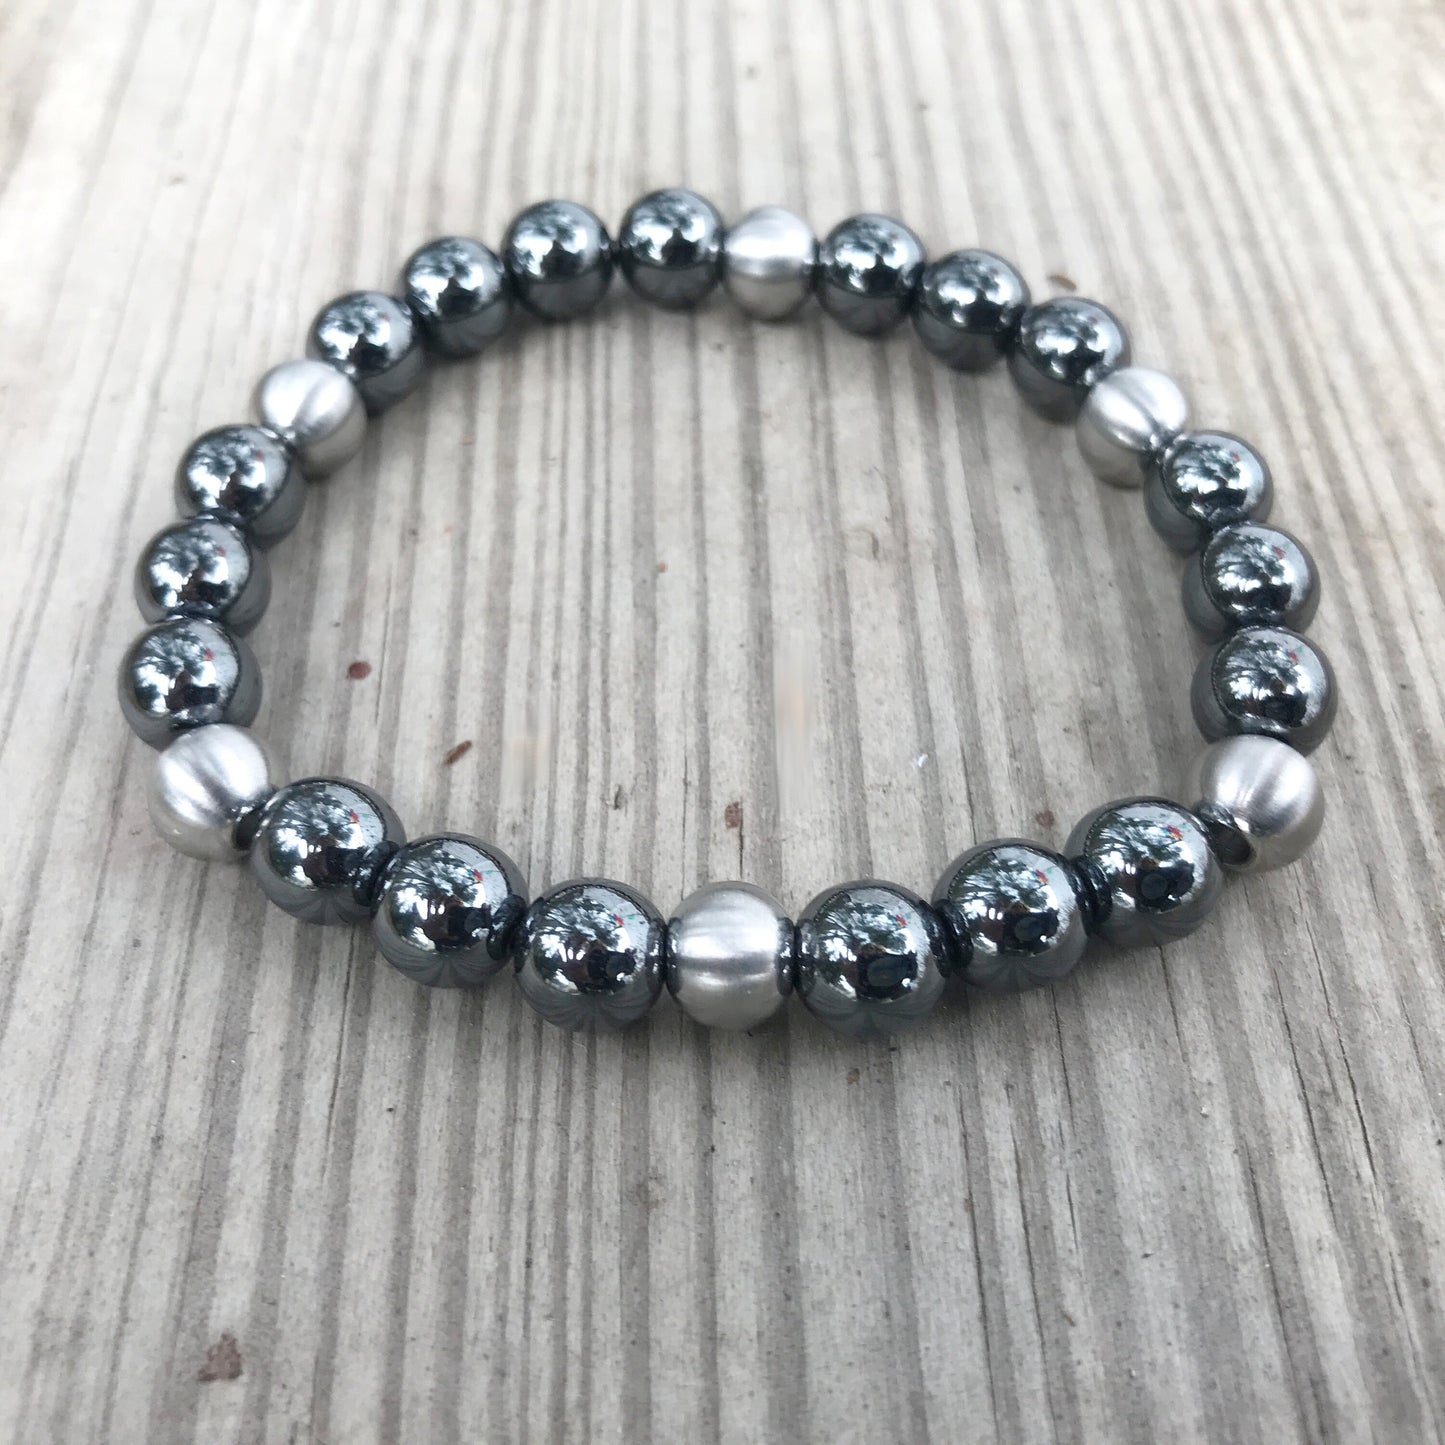 8mm Bead Bracelet, Stretchy Bracelets for Women, Stainless Steel Jewelry, Large Metal Bead Bracelet, Silver and Black